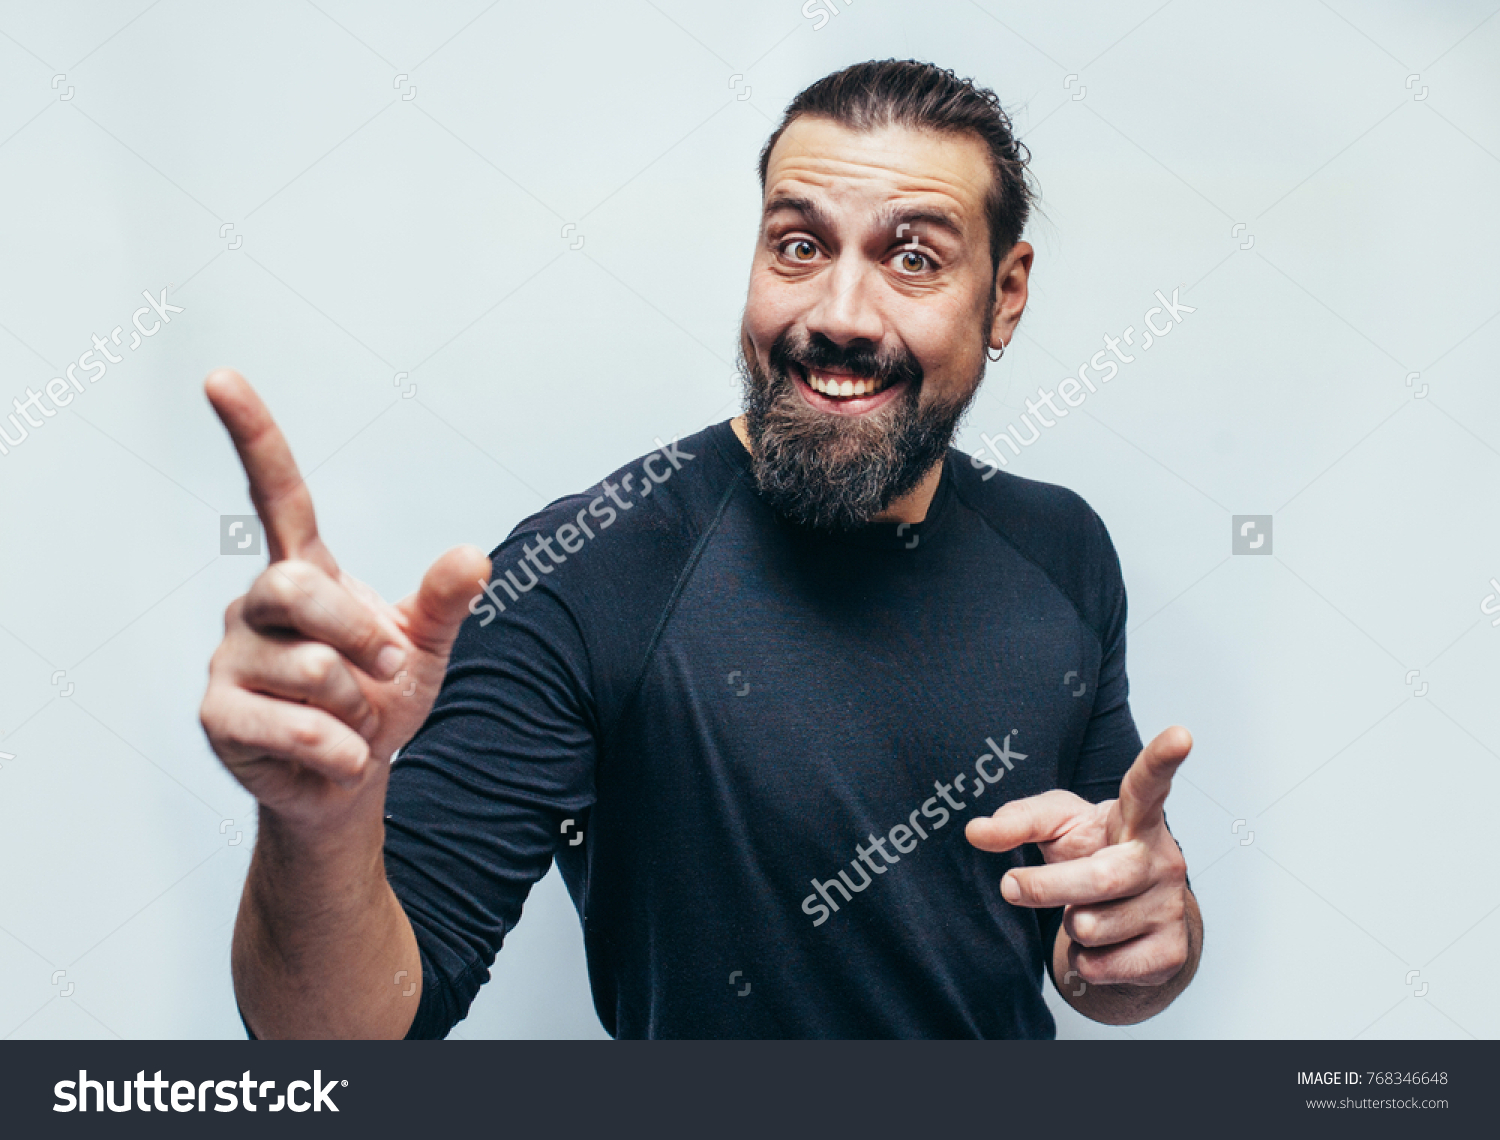 Stylish bearded hipster man with appealing dark eyes smiling into camera. Hipster man with beard  having cheerful look. Positive emotions.Crazy emotions. joy. The idea came. The emotional portrait.  #768346648